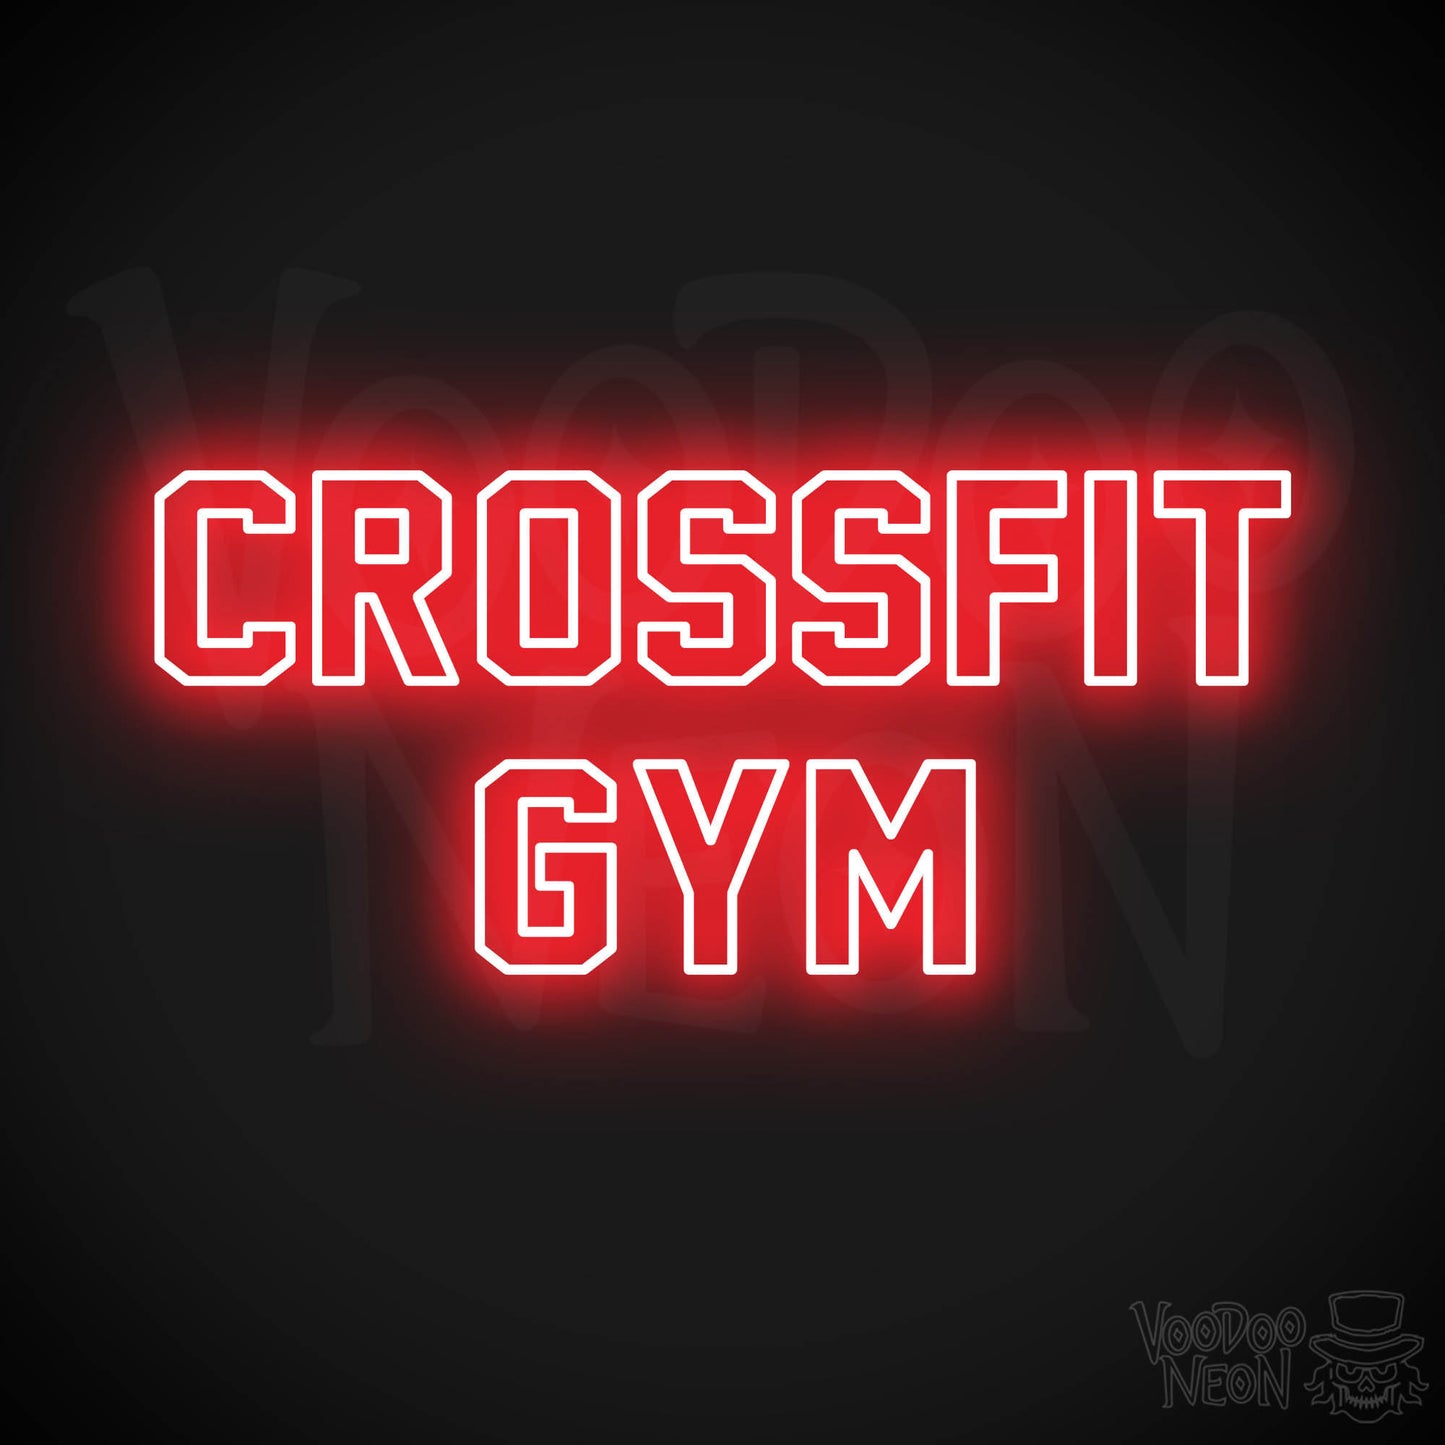 Crossfit Gym LED Neon - Red